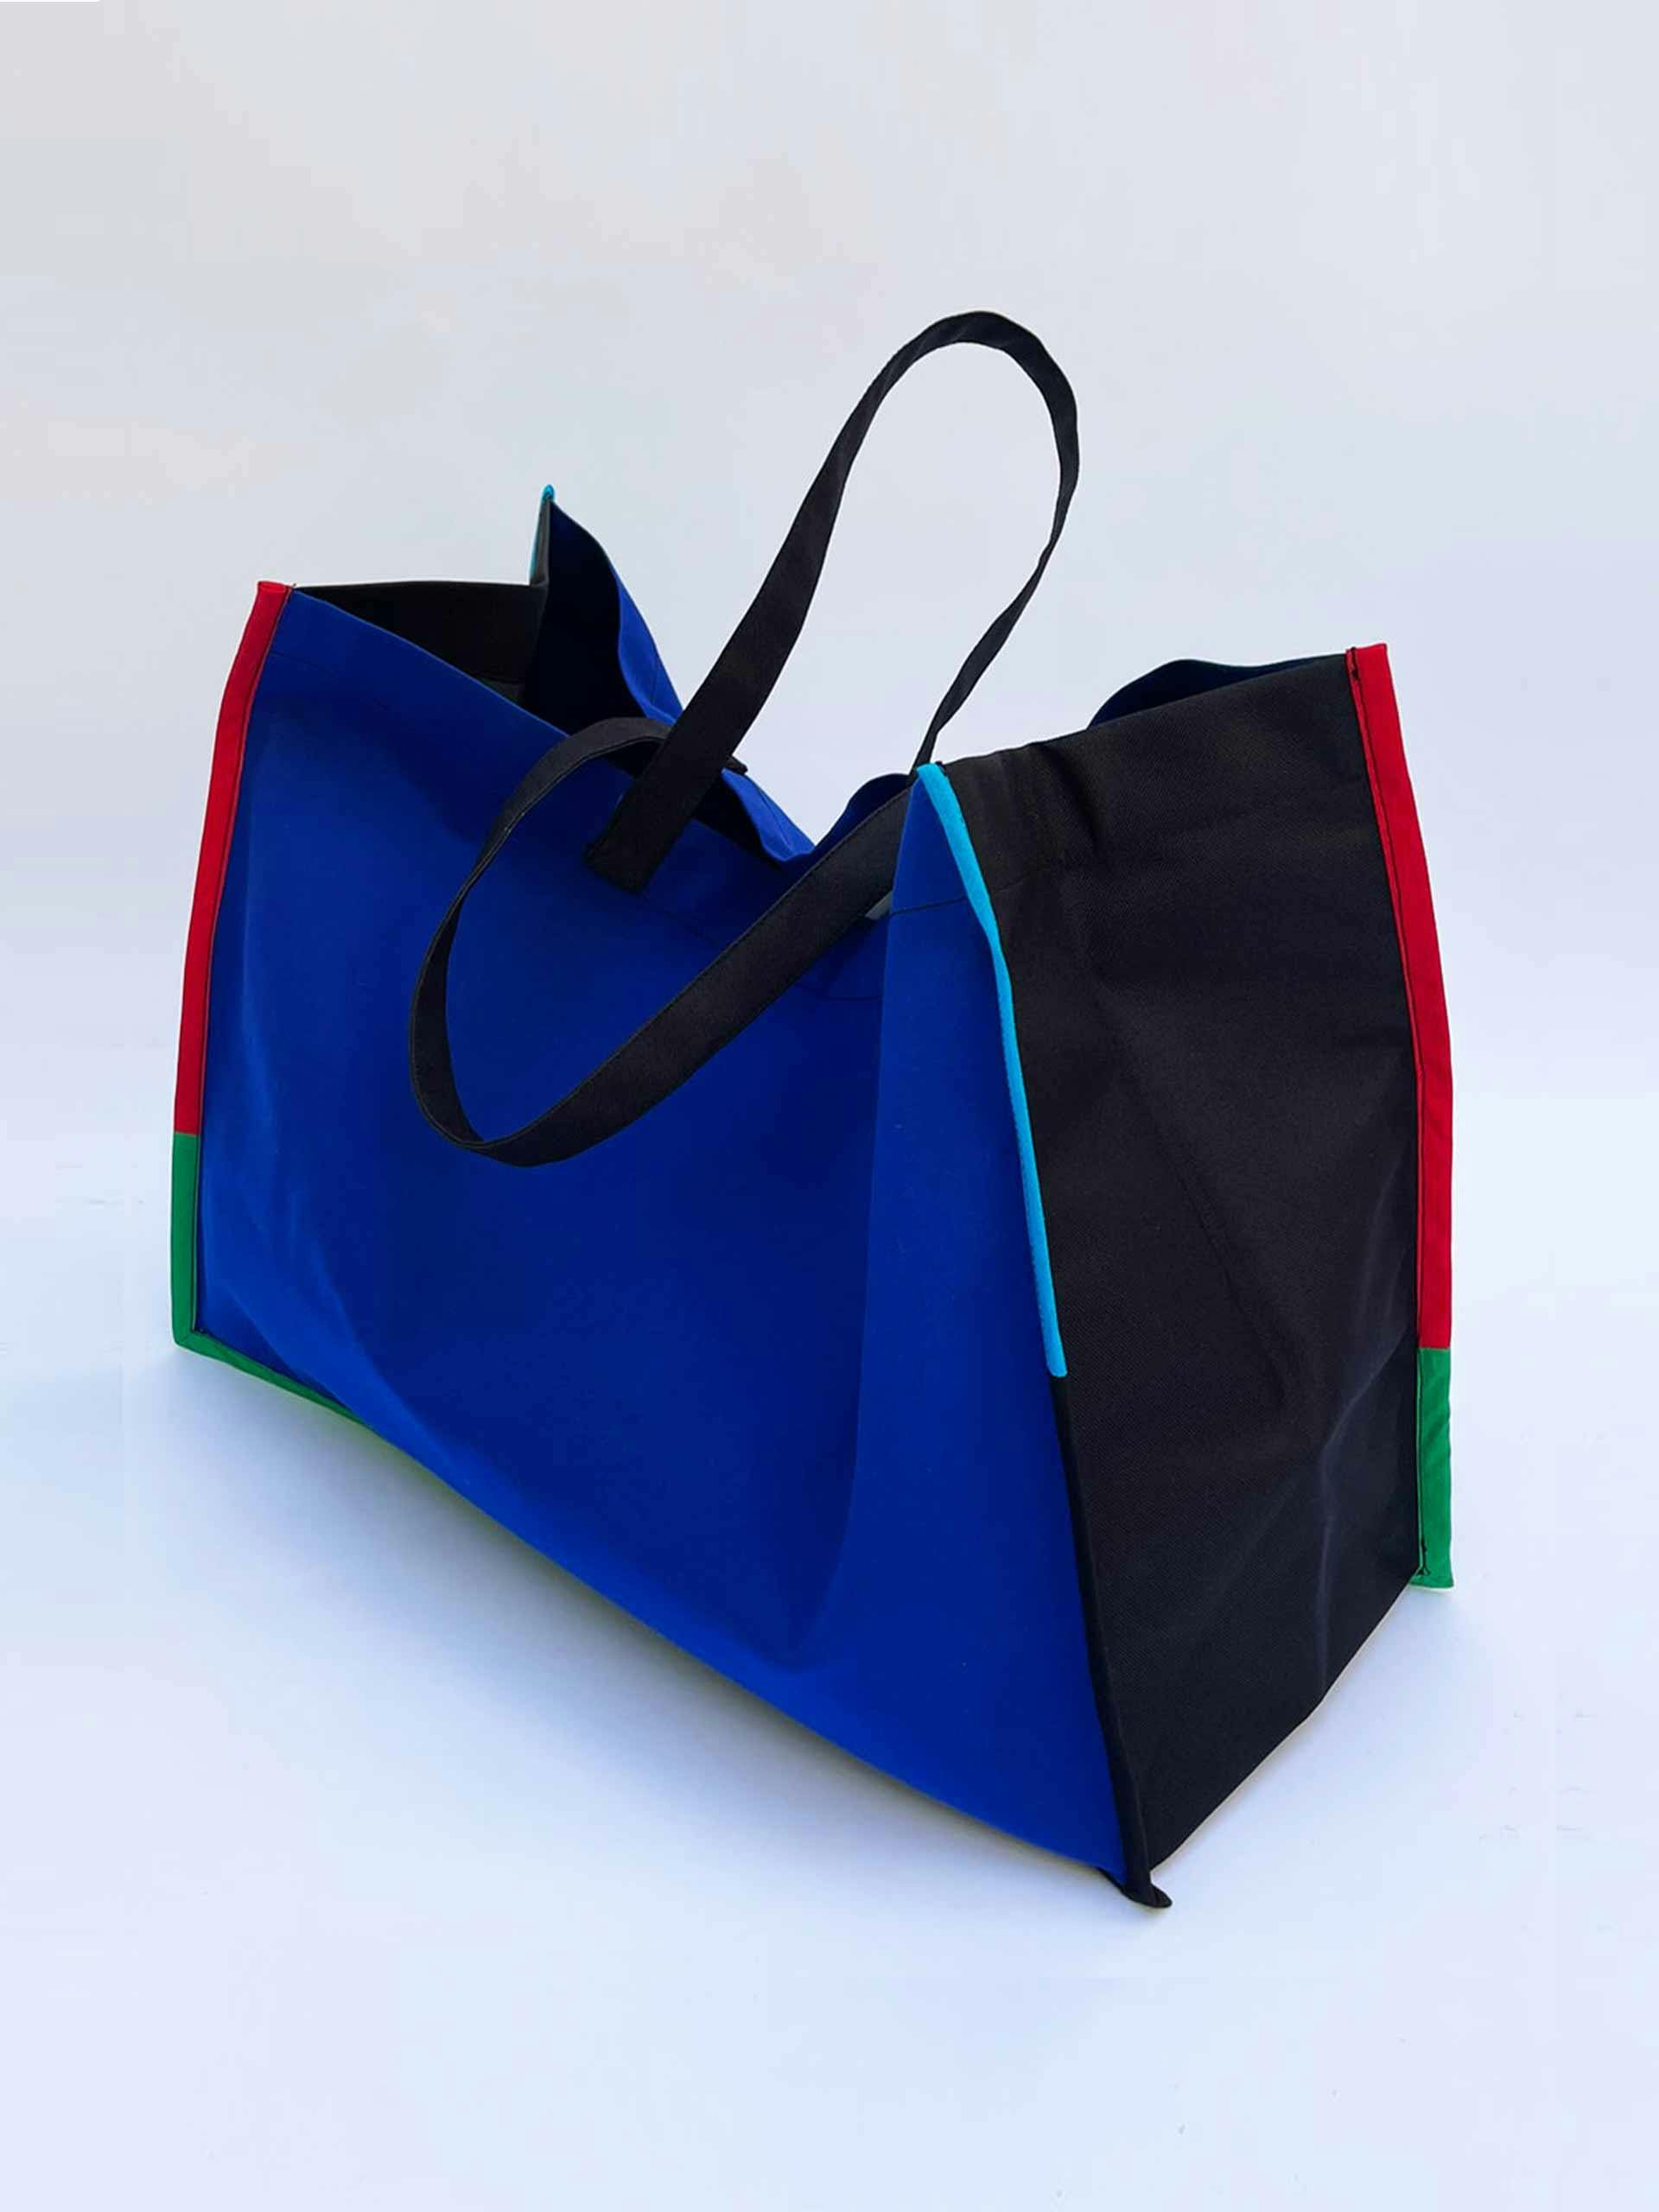 Blue and black canvas tote bag